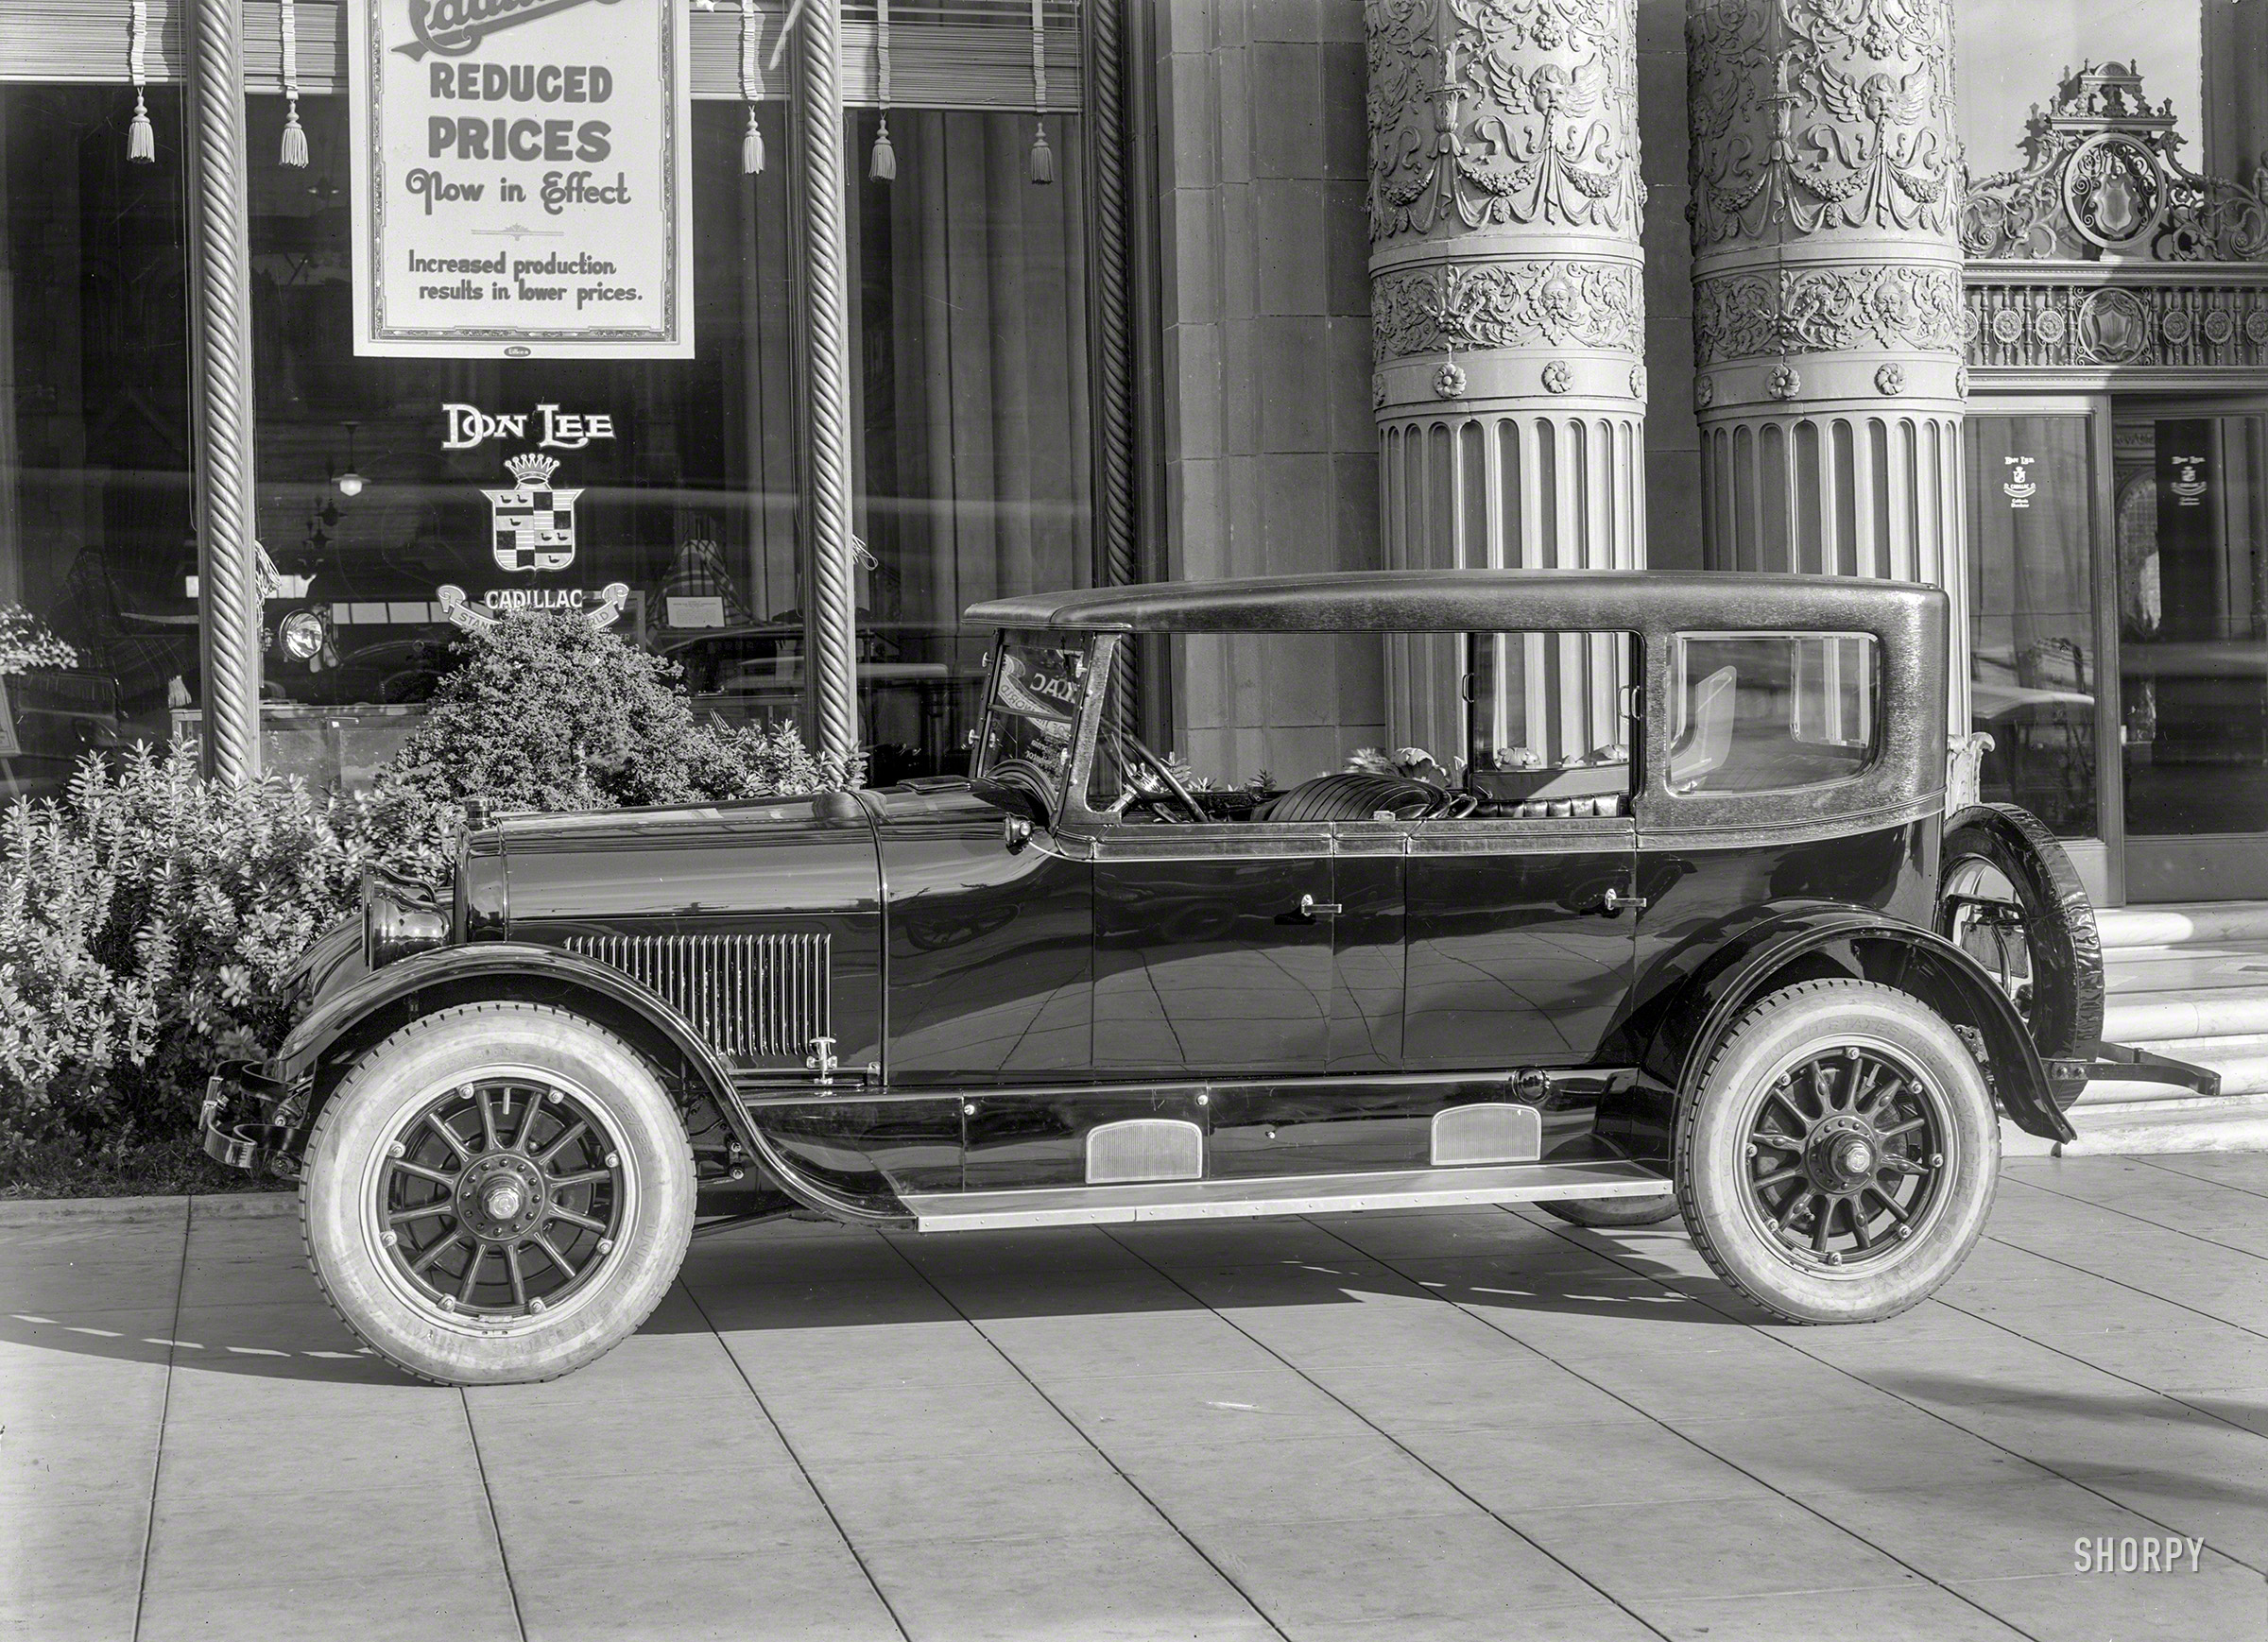 San Francisco circa 1924. "Don Lee Cadillac agency -- N.E. corner Van Ness & O'Farrell." 5x7 glass negative by Christopher Helin. View full size.